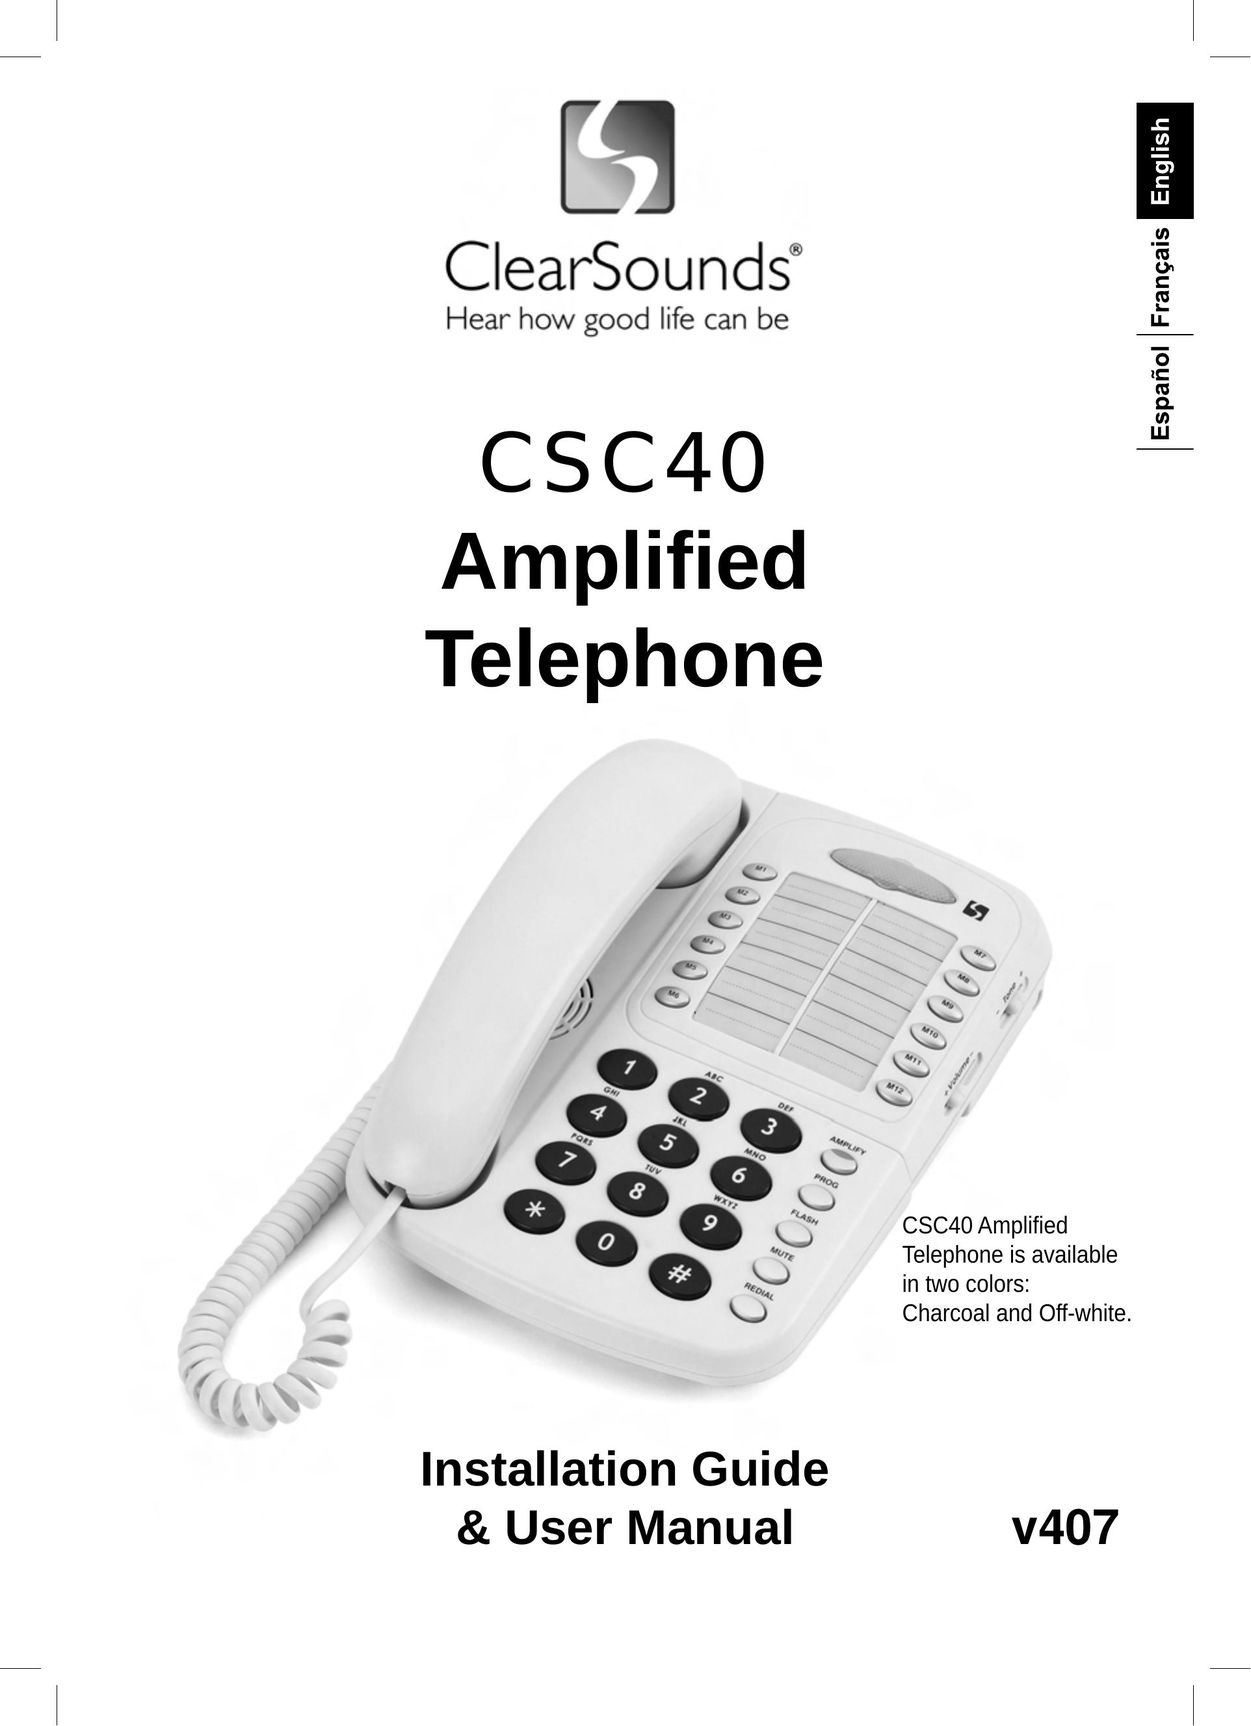 ClearSounds v407 Amplified Phone User Manual